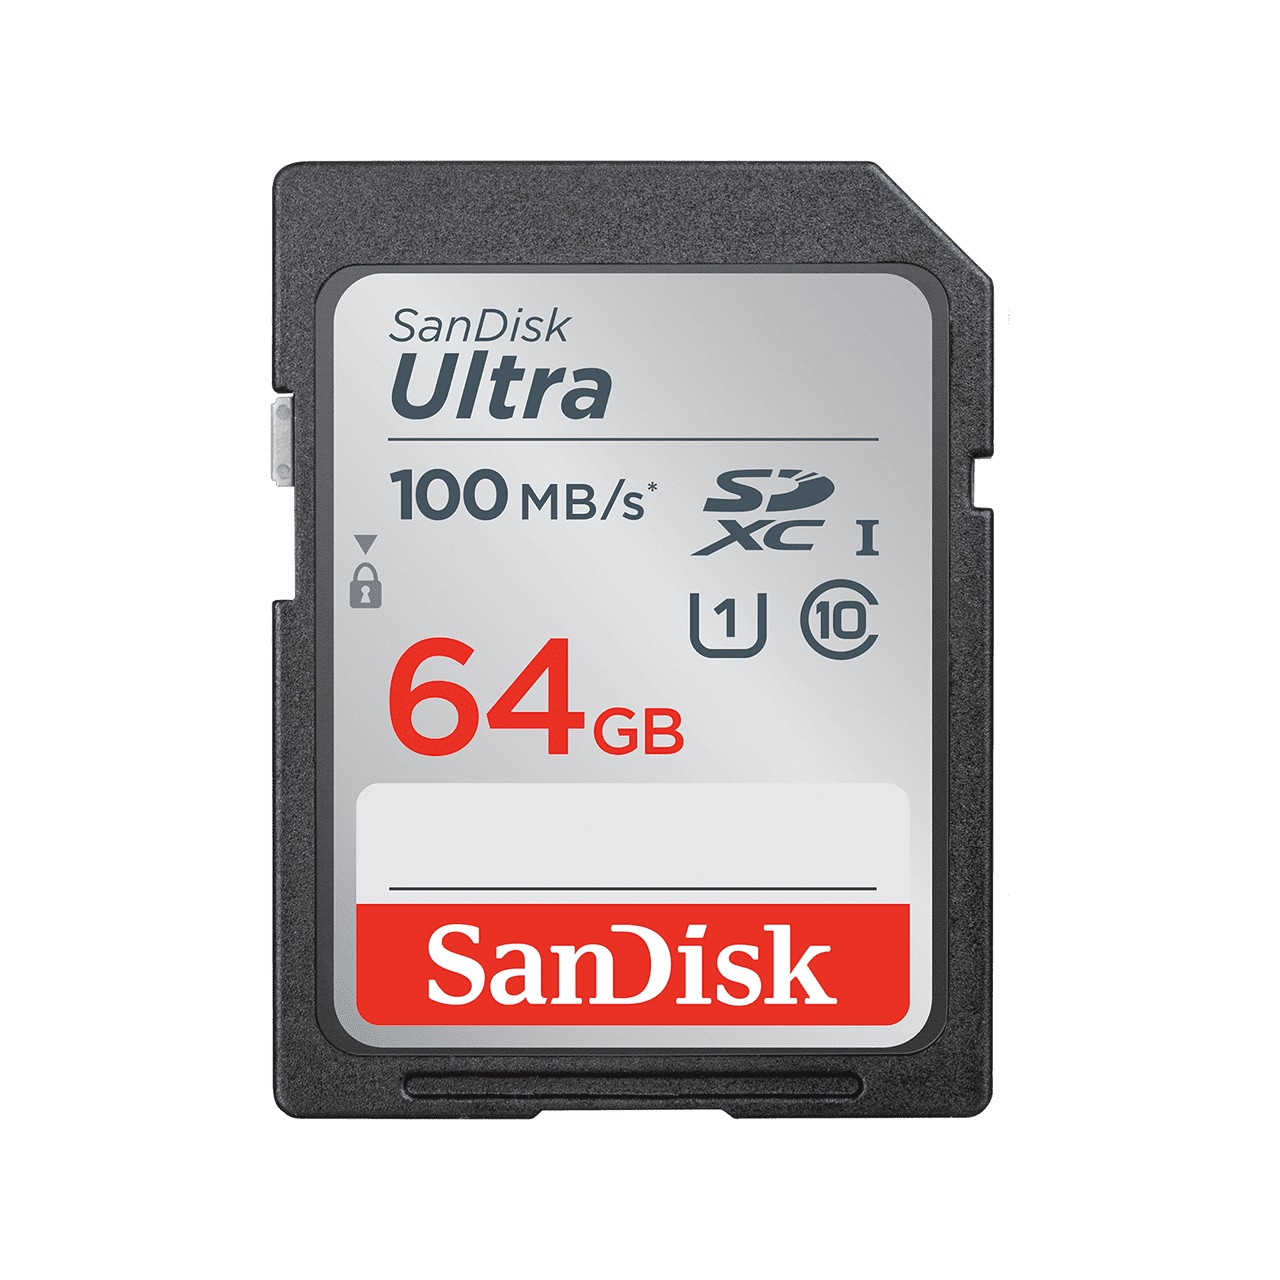 You may also be interested in the SanDisk SDDR-F451-ANGNN Reader CFexpress PCIE T....